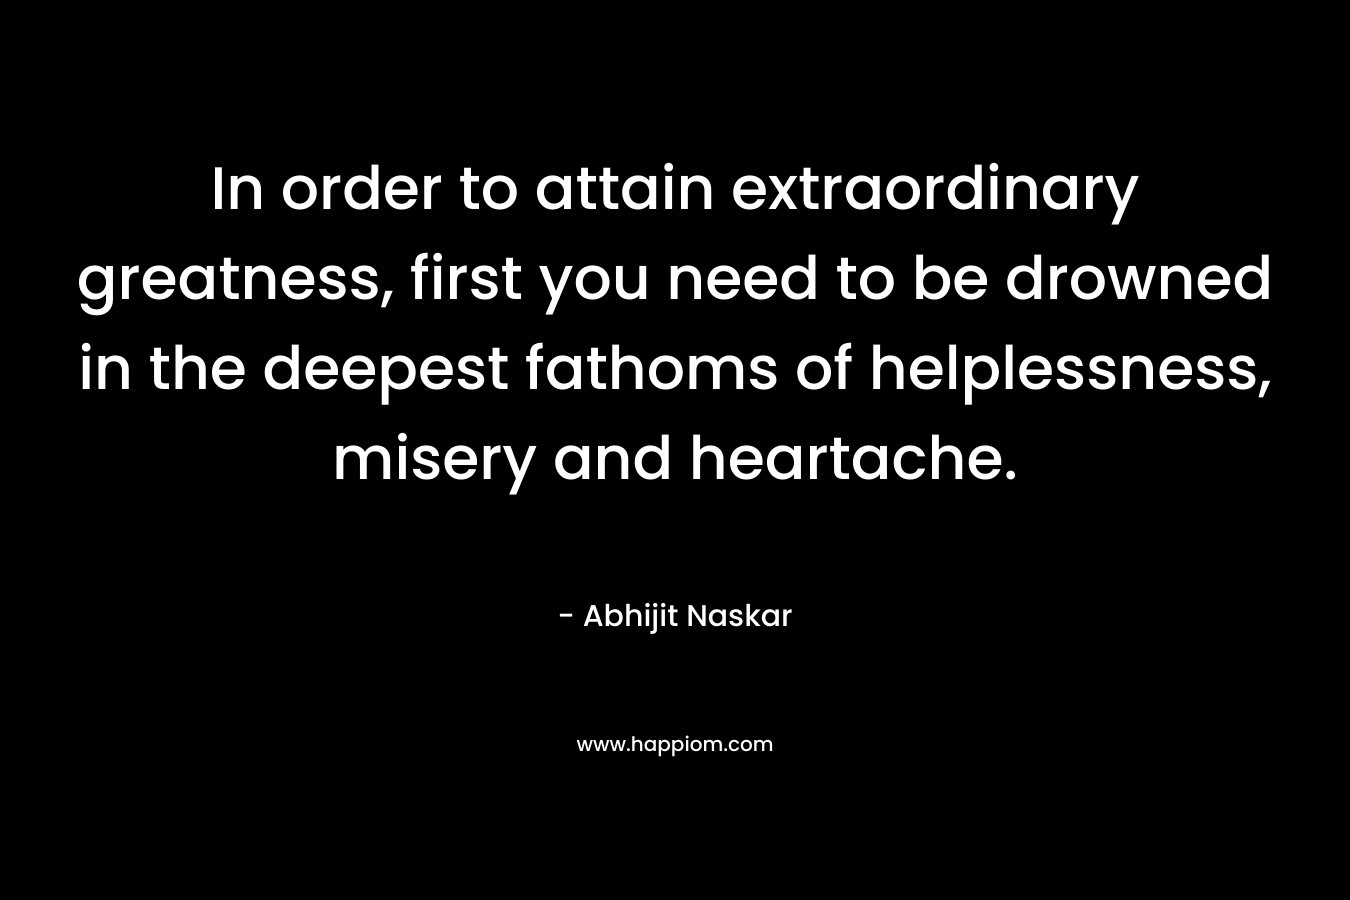 In order to attain extraordinary greatness, first you need to be drowned in the deepest fathoms of helplessness, misery and heartache. – Abhijit Naskar